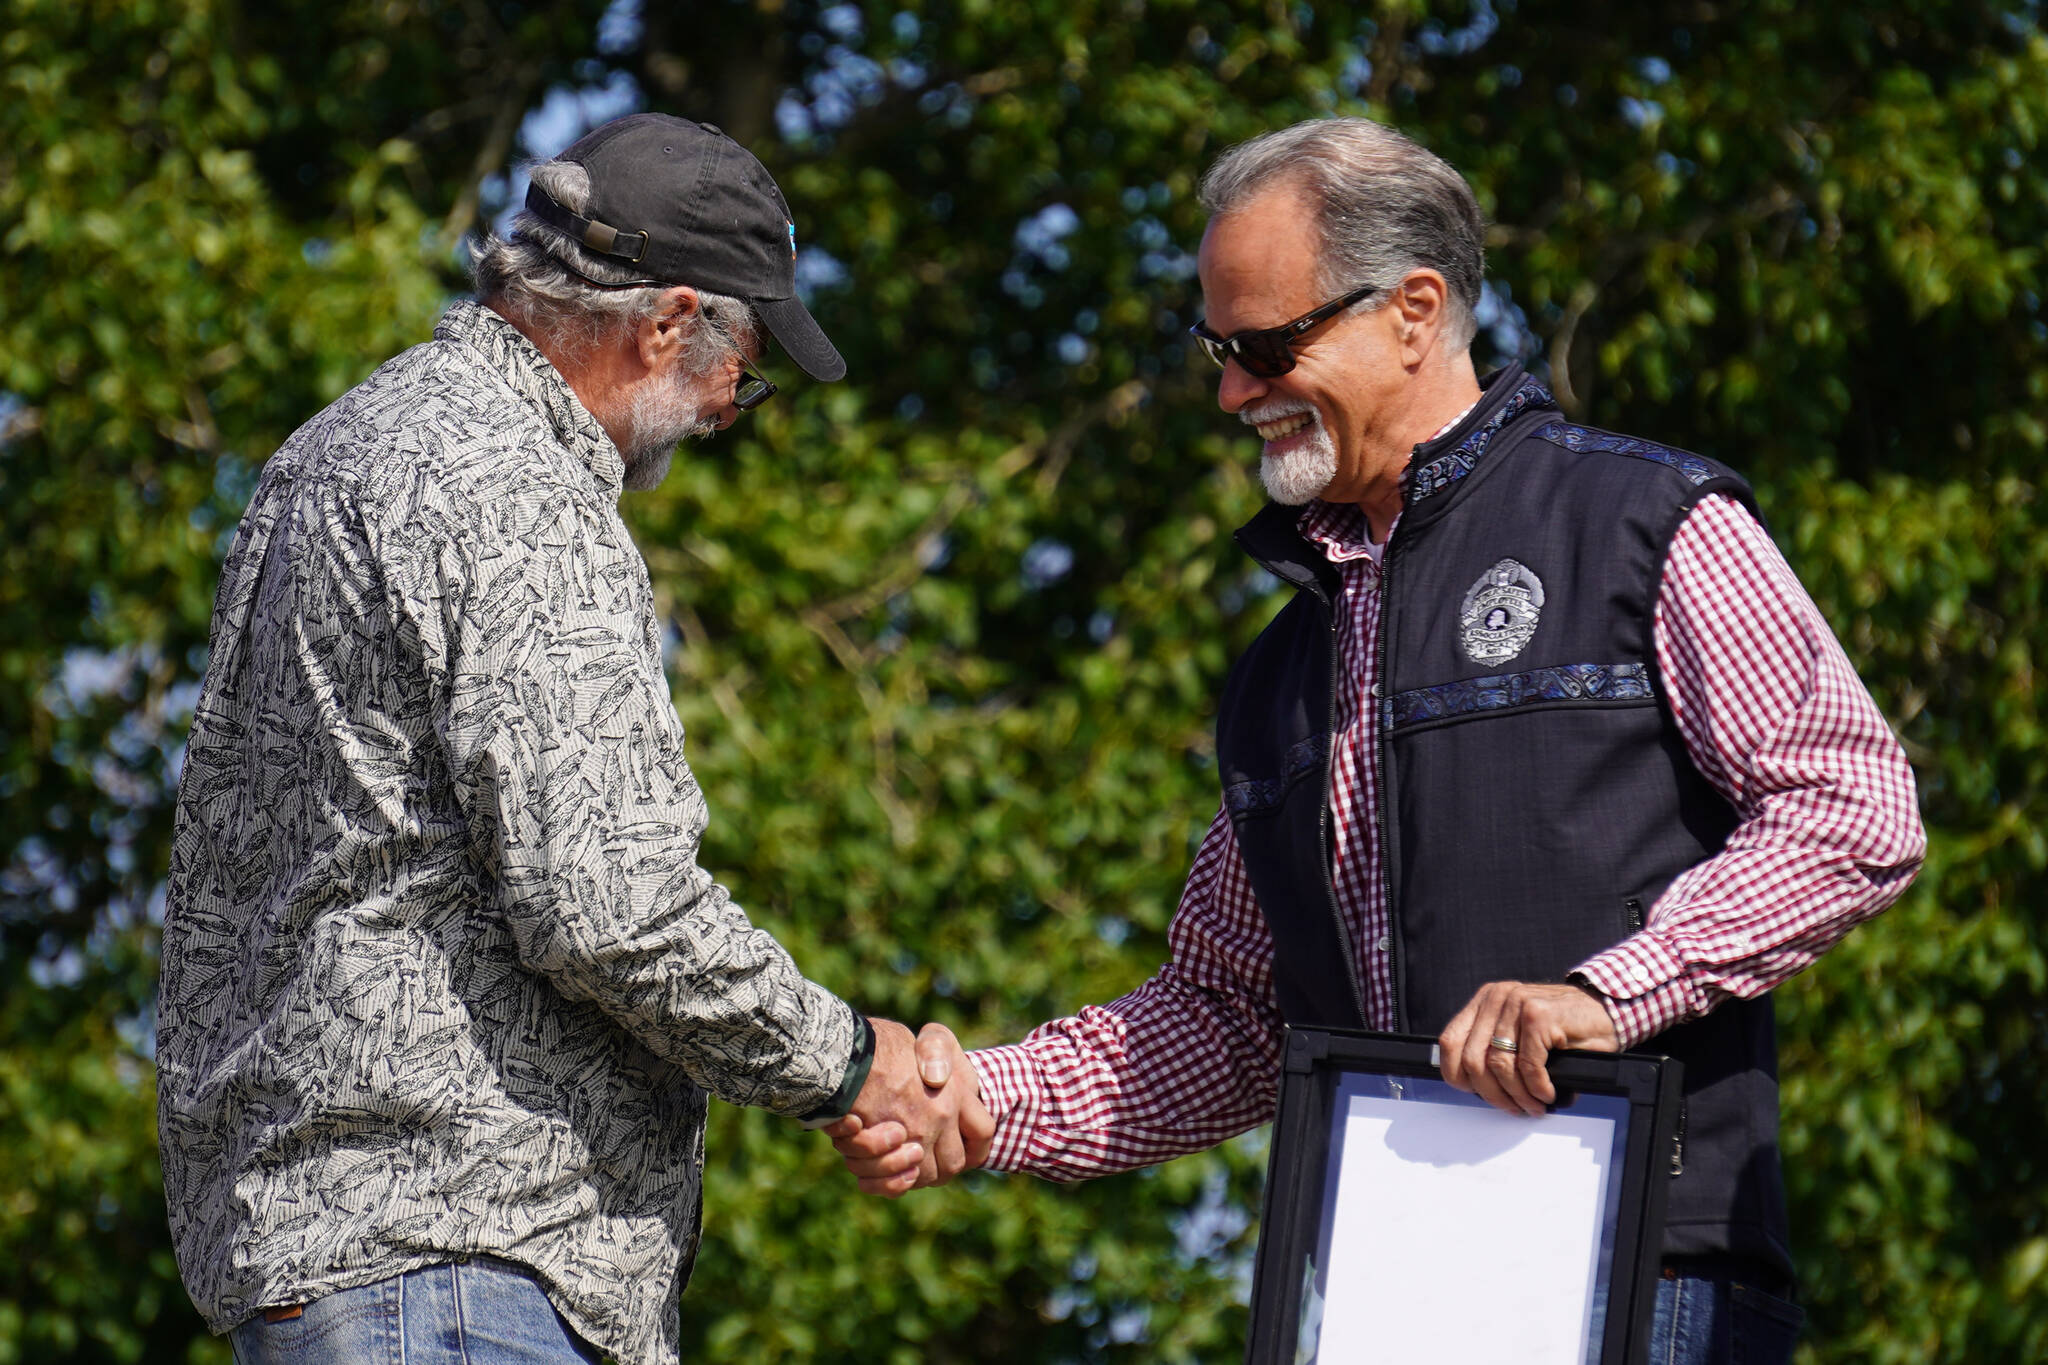 Dyer VanDevere receives the Outstanding Individual Commercial Fishing Contribution Award from Kenai Peninsula Borough Mayor Peter Micciche during Industry Appreciation Day festivities at the Kenai softball greenstrip on Saturday, Aug. 19, 2023. (Jake Dye/Peninsula Clarion)